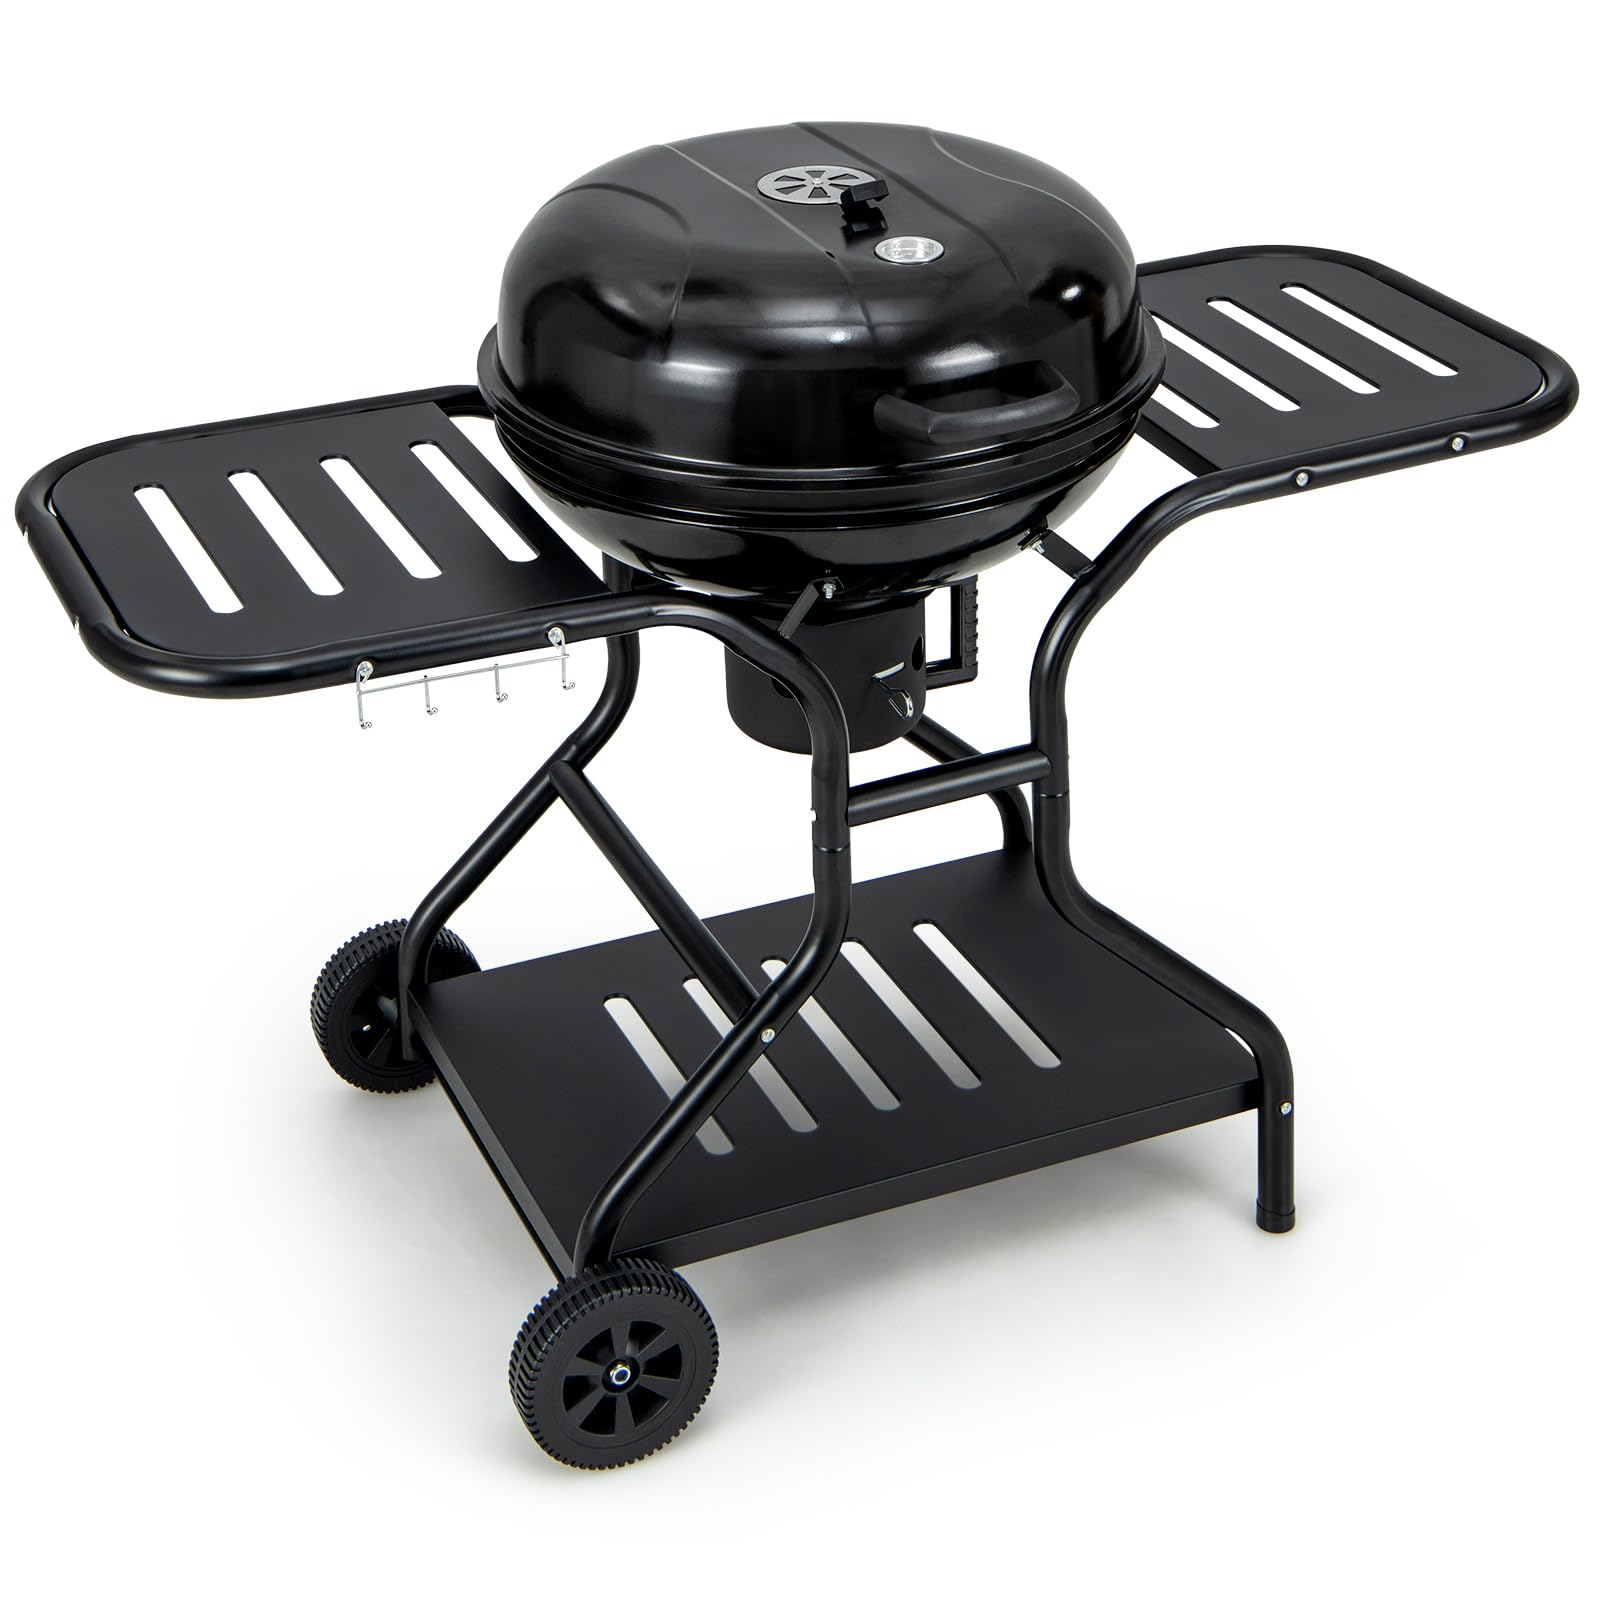 Giantex Kettle Charcoal Grill 22-Inch, Porcelain Enamel Body and Lid, 2 Side Tables with 4 Hooks, Storage Shelf